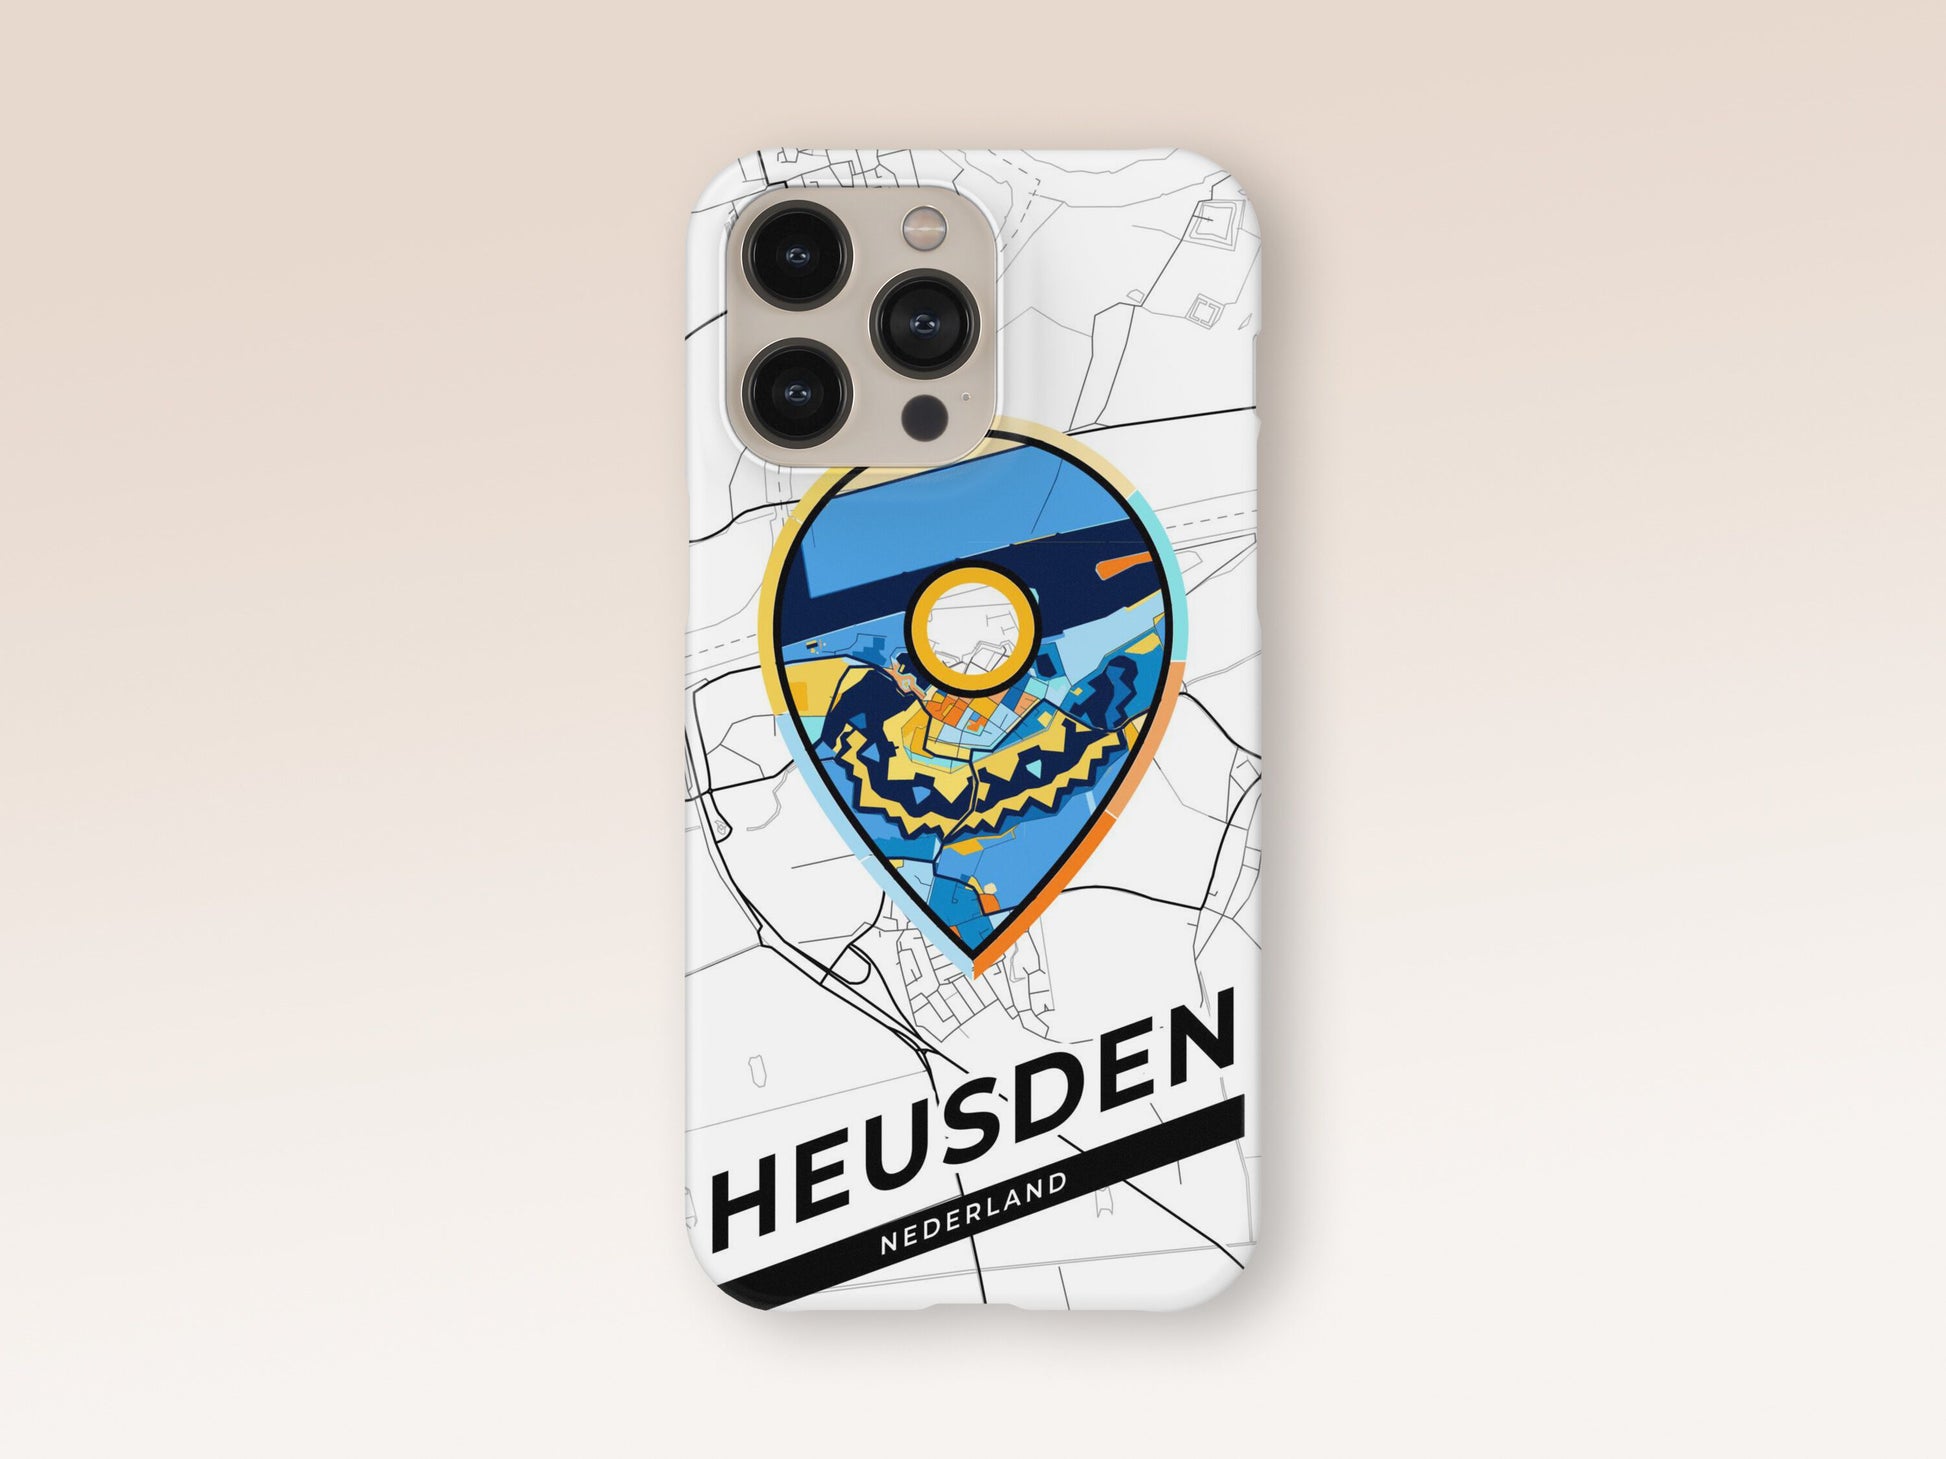 Heusden Netherlands slim phone case with colorful icon. Birthday, wedding or housewarming gift. Couple match cases. 1